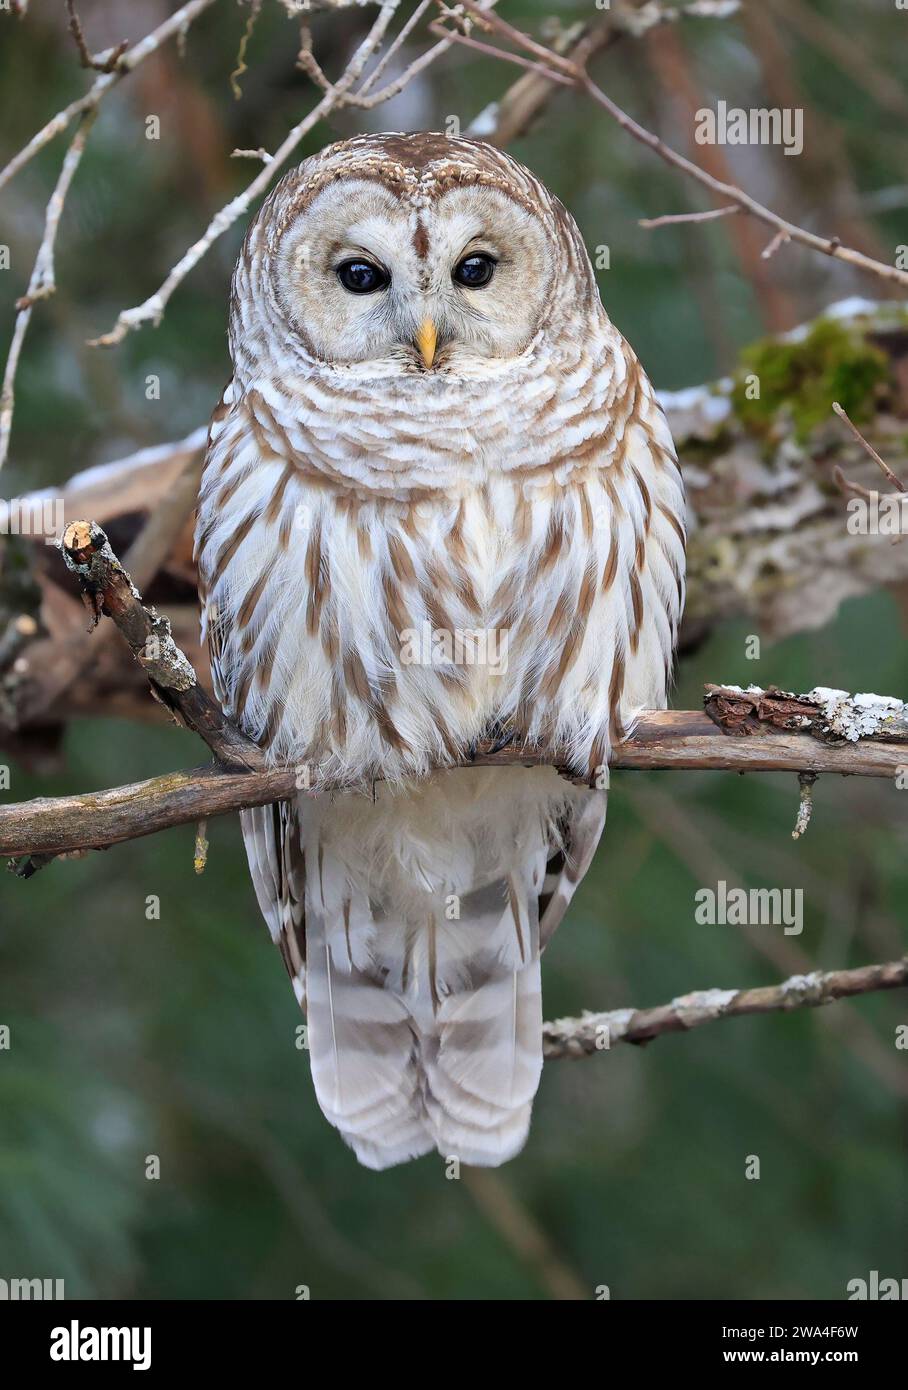 Barred Owl portrait on a tree branch with green background, Quebec, Canada Stock Photo